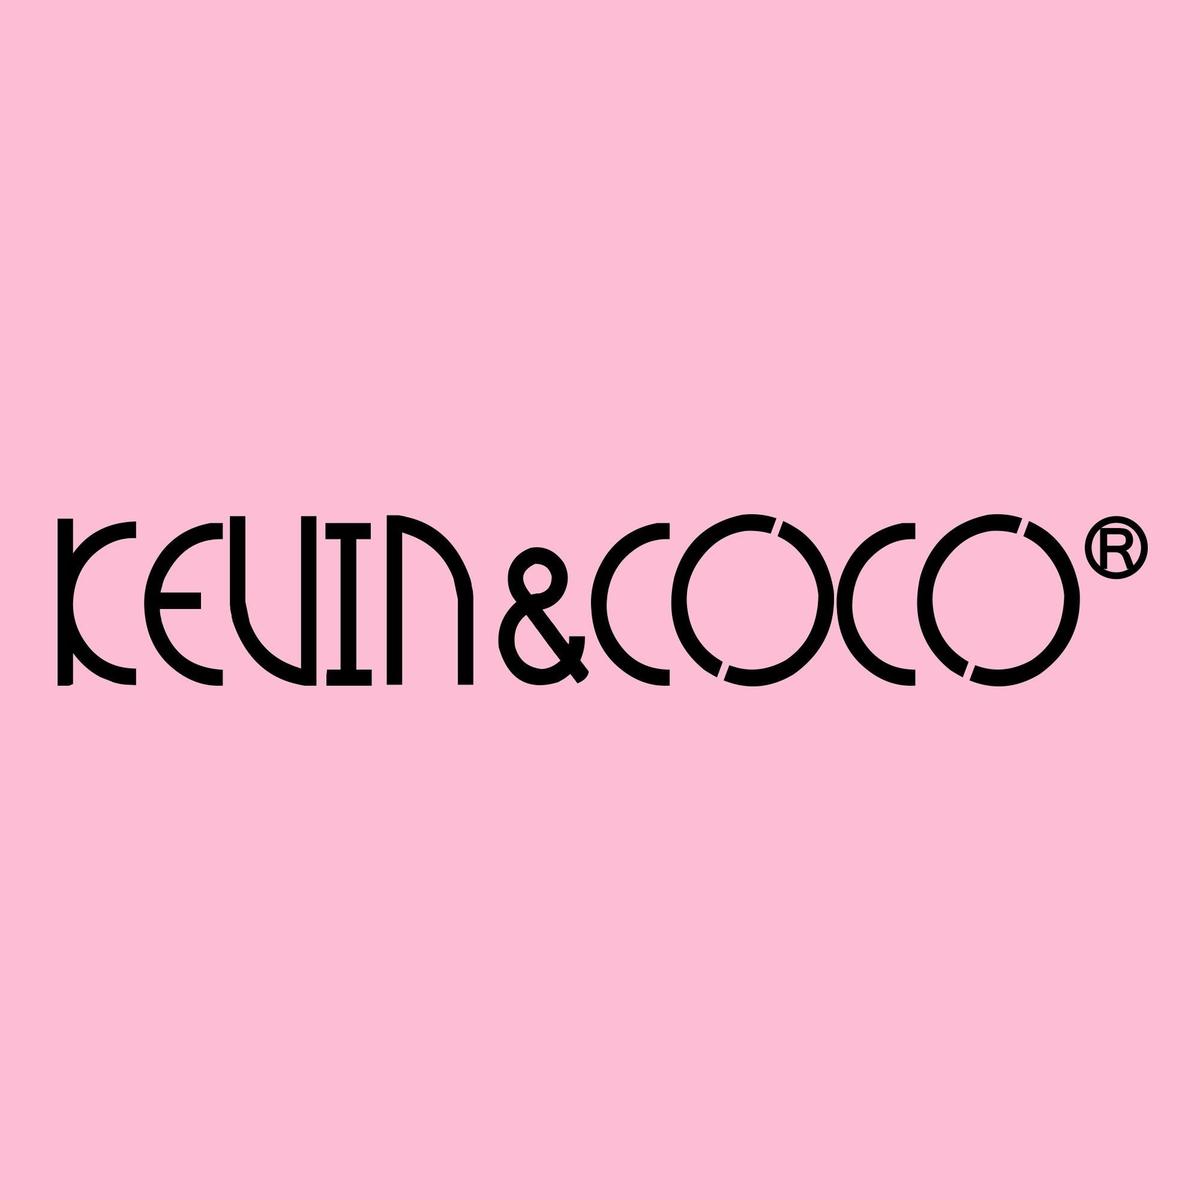 KEVIN&COCO's images